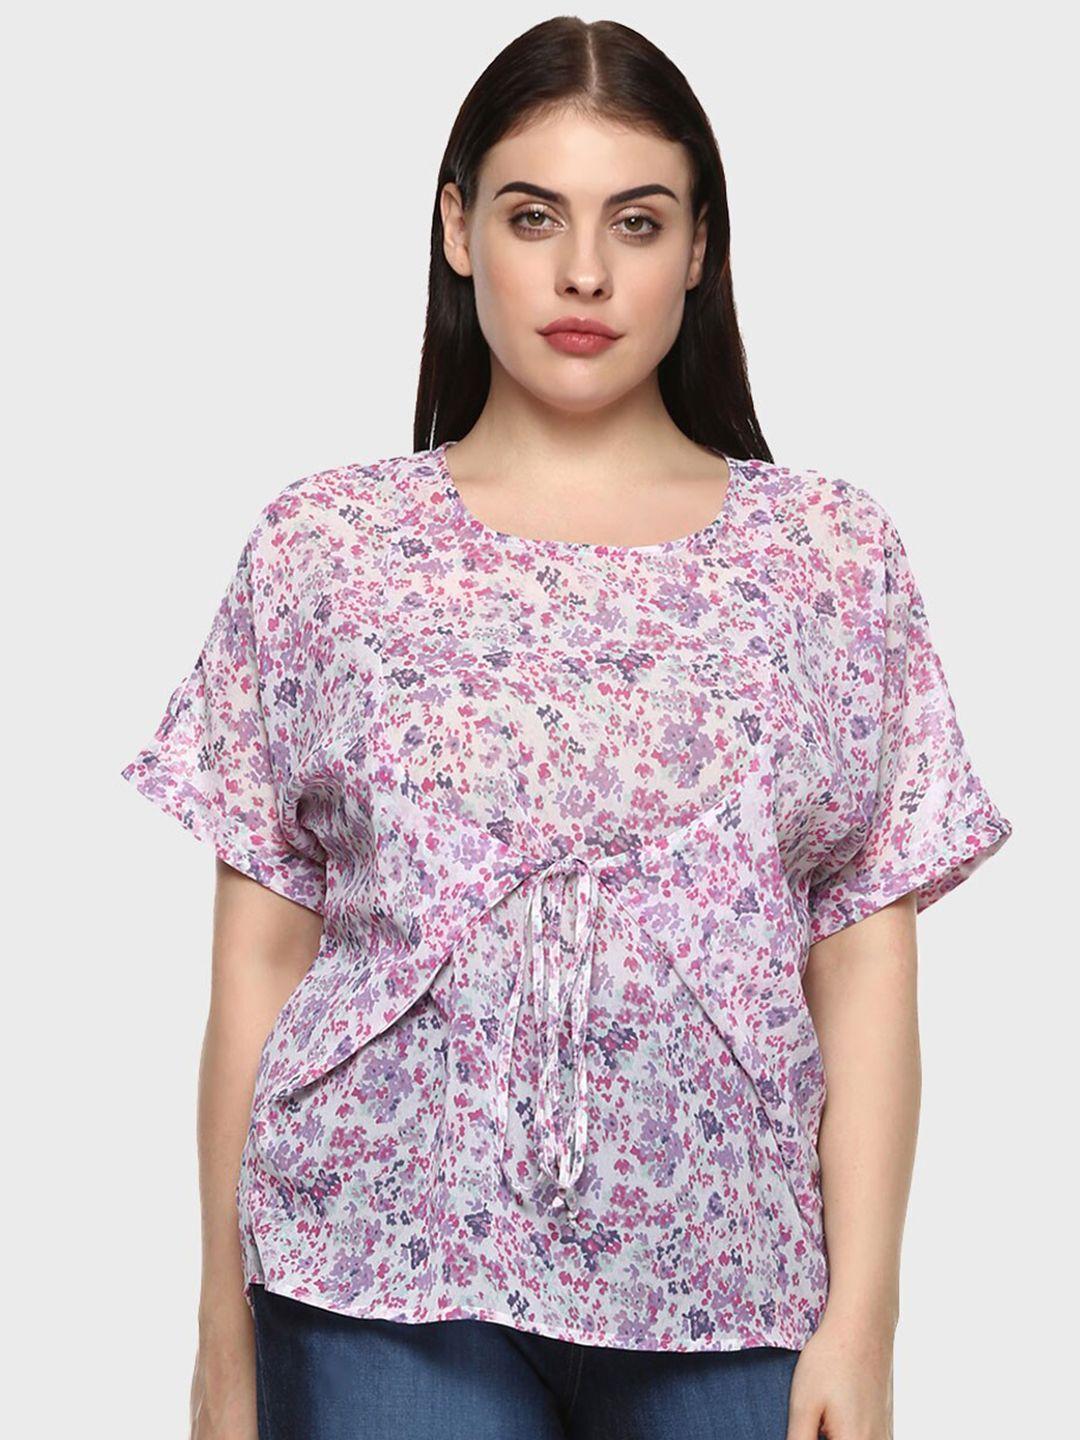 lastinch multicoloured & orchid tint floral print georgette top